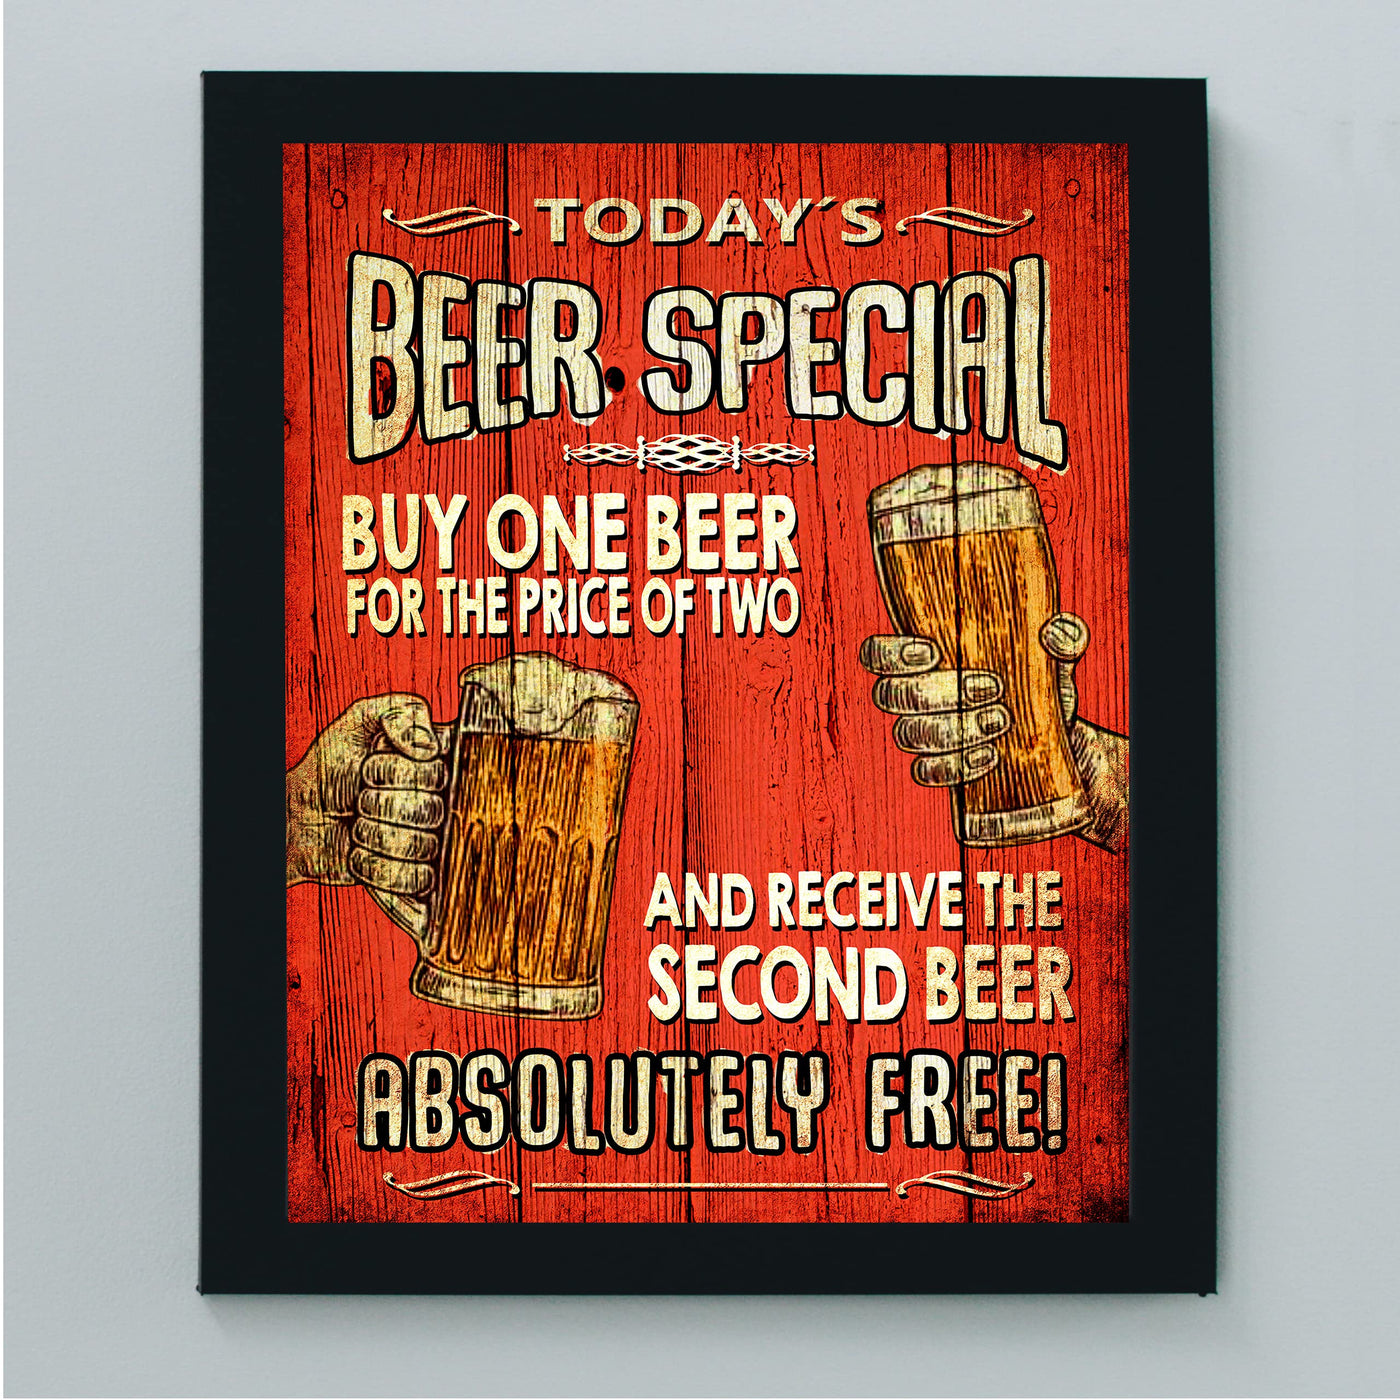 Today's Beer Special-Buy One Beer for Price of Two Funny Bar Sign -8x10" Rustic Beer & Alcohol Wall Art Print-Ready to Frame. Humorous Home-Cave-Garage-Shop Decor. Fun Gift! Printed On Photo Paper.